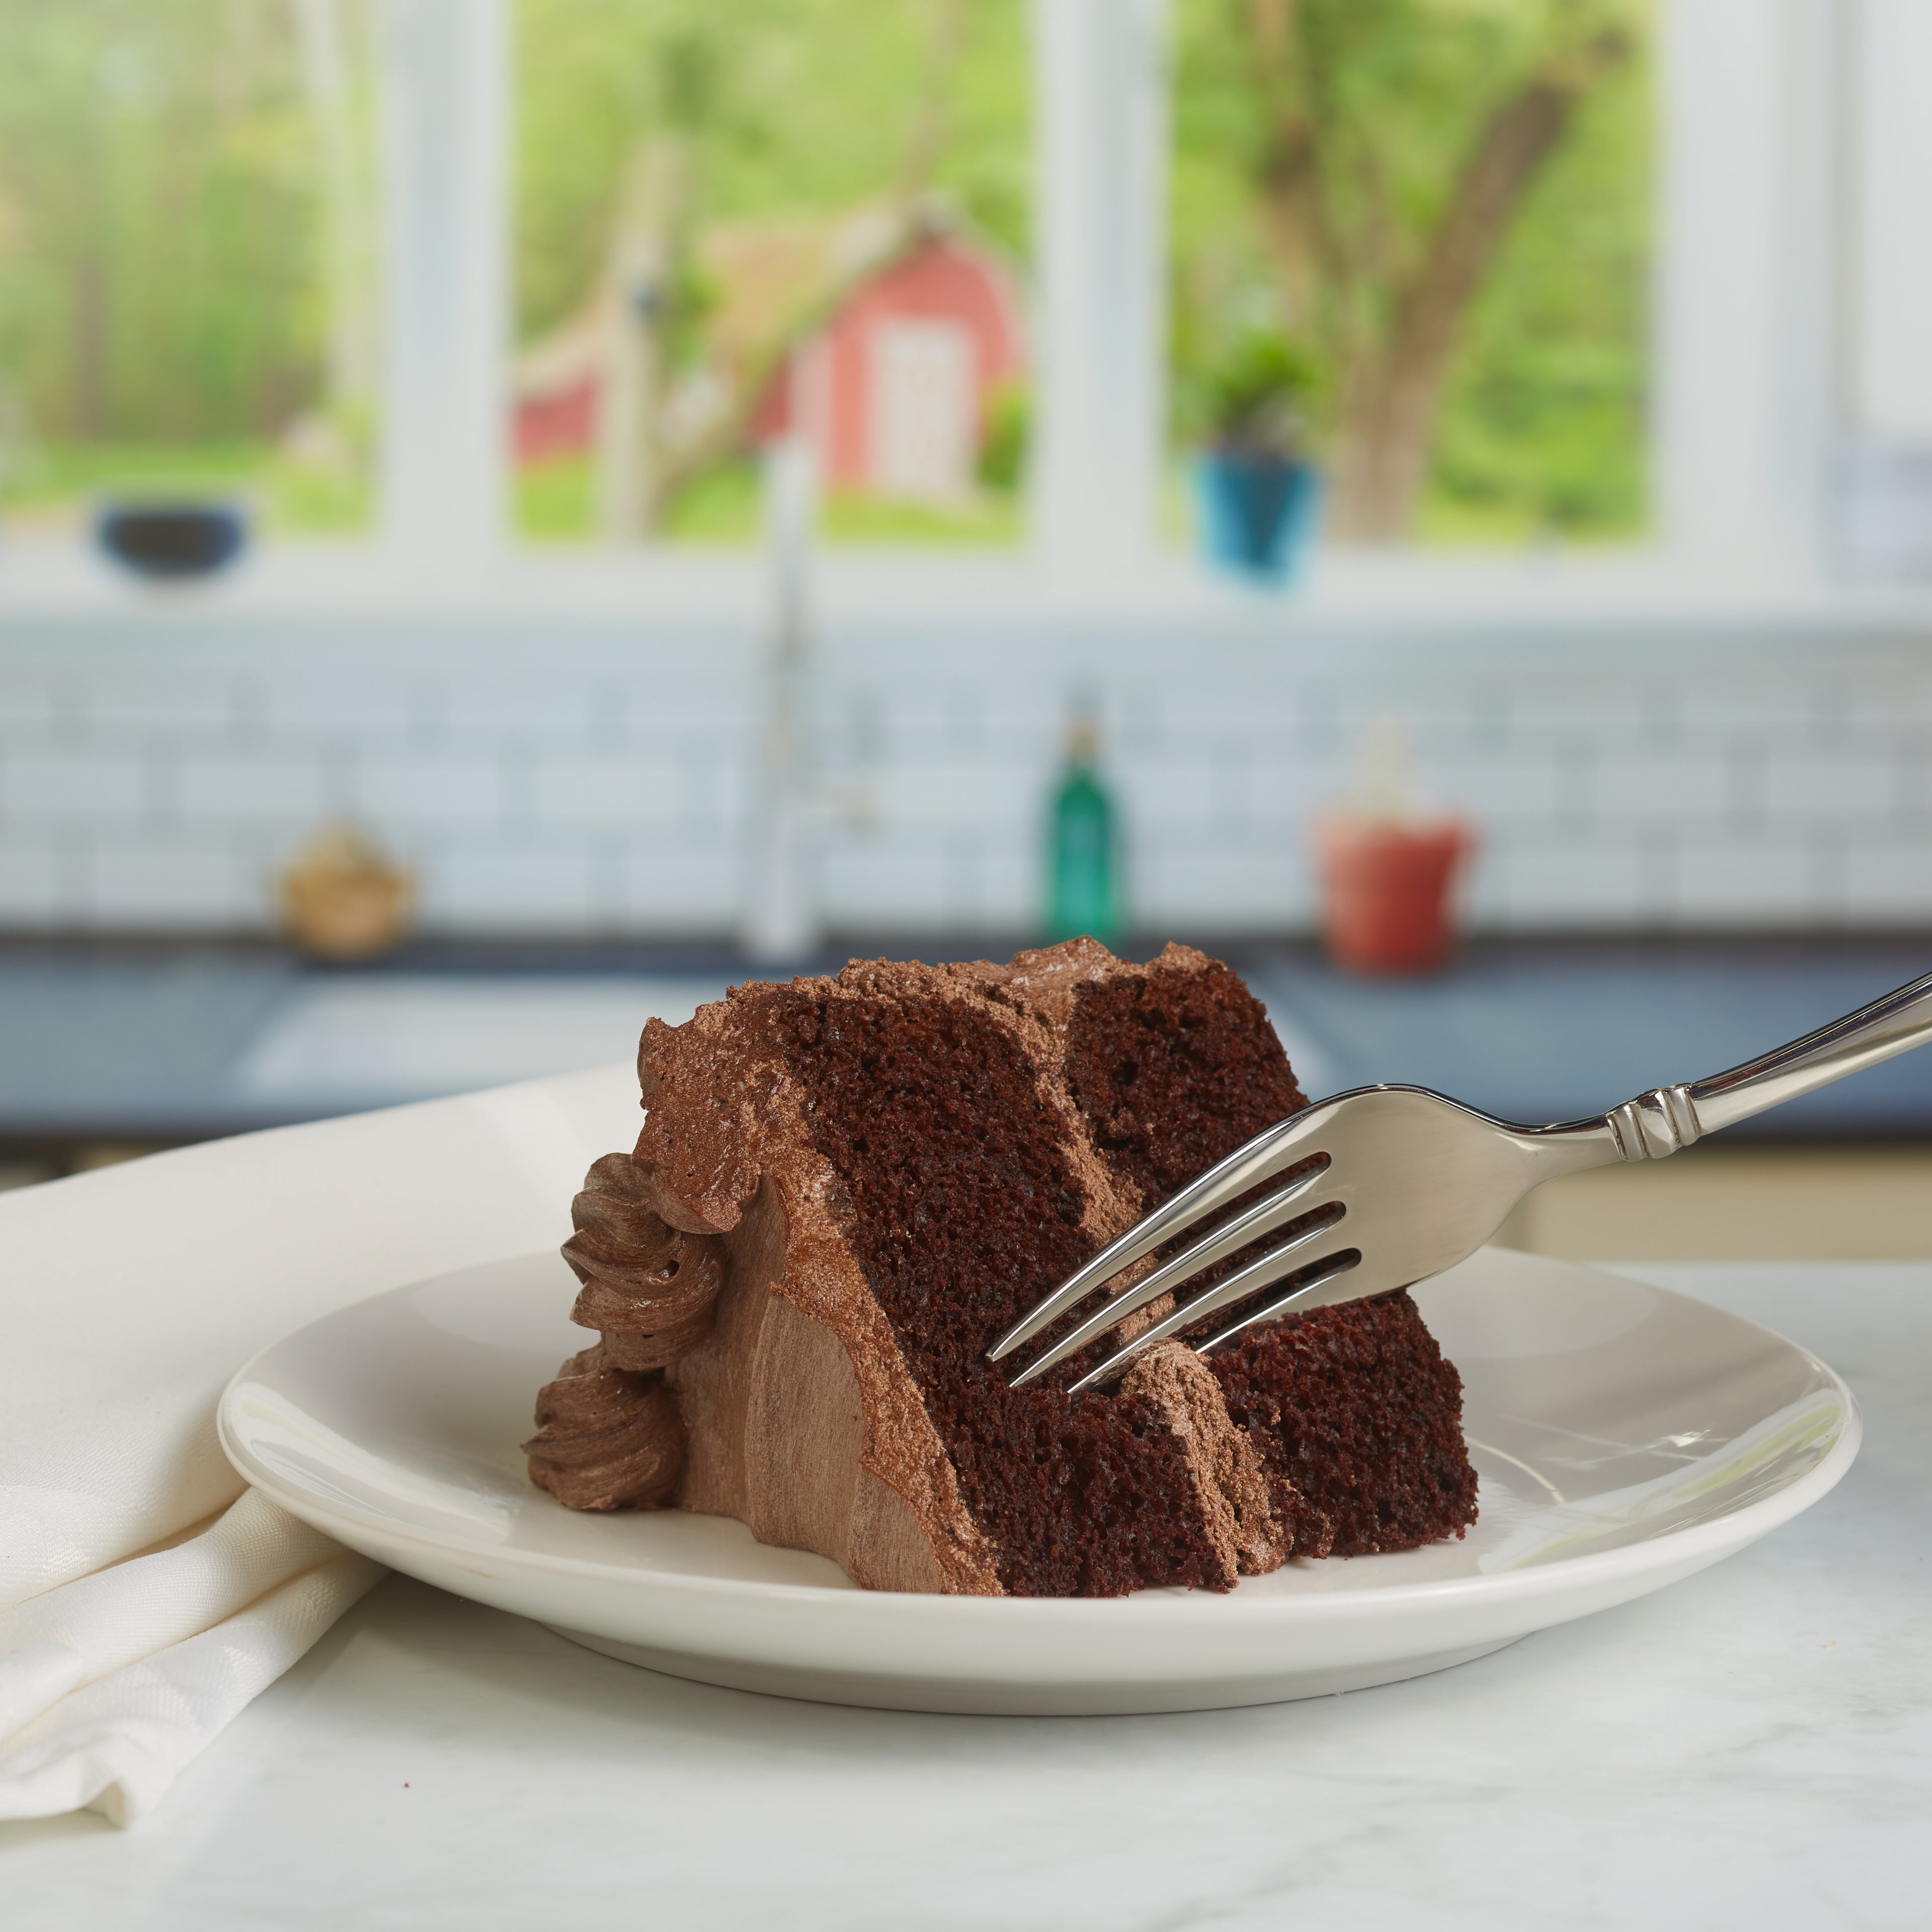 Image of a fork cutting into a chocolate cake slice